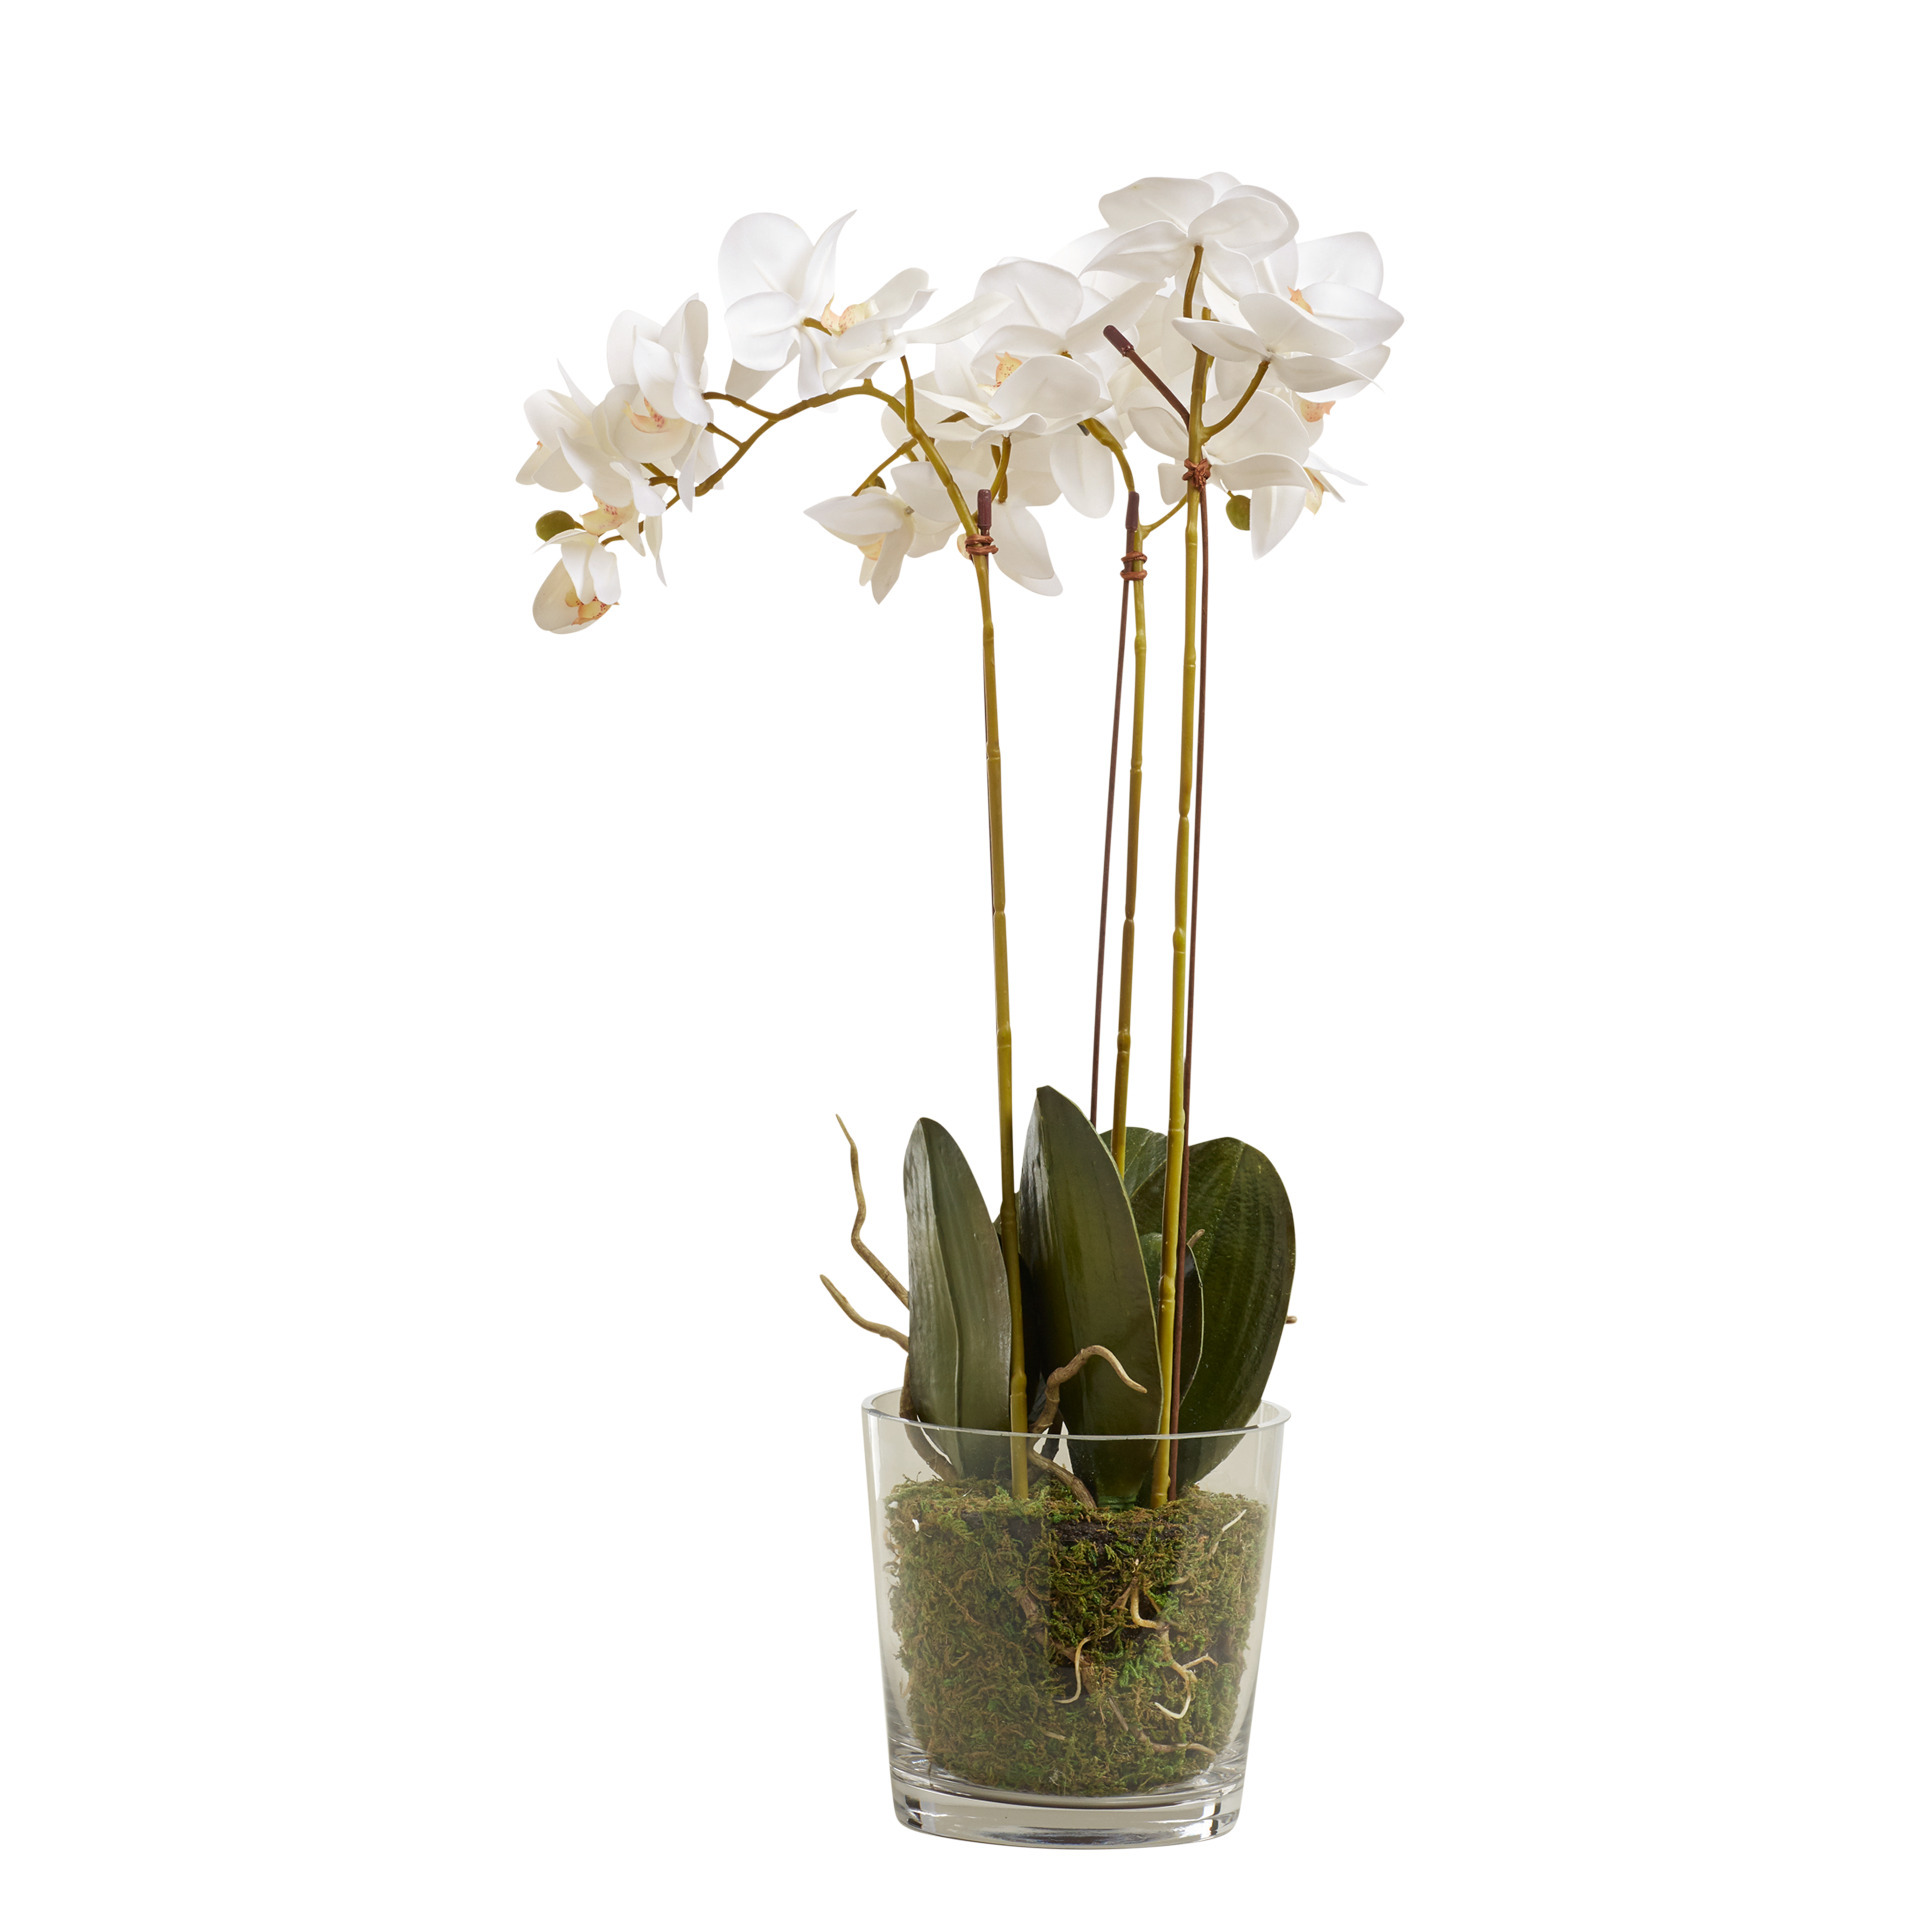 Faux Phalaenopsis Orchid With Glass Vase - White